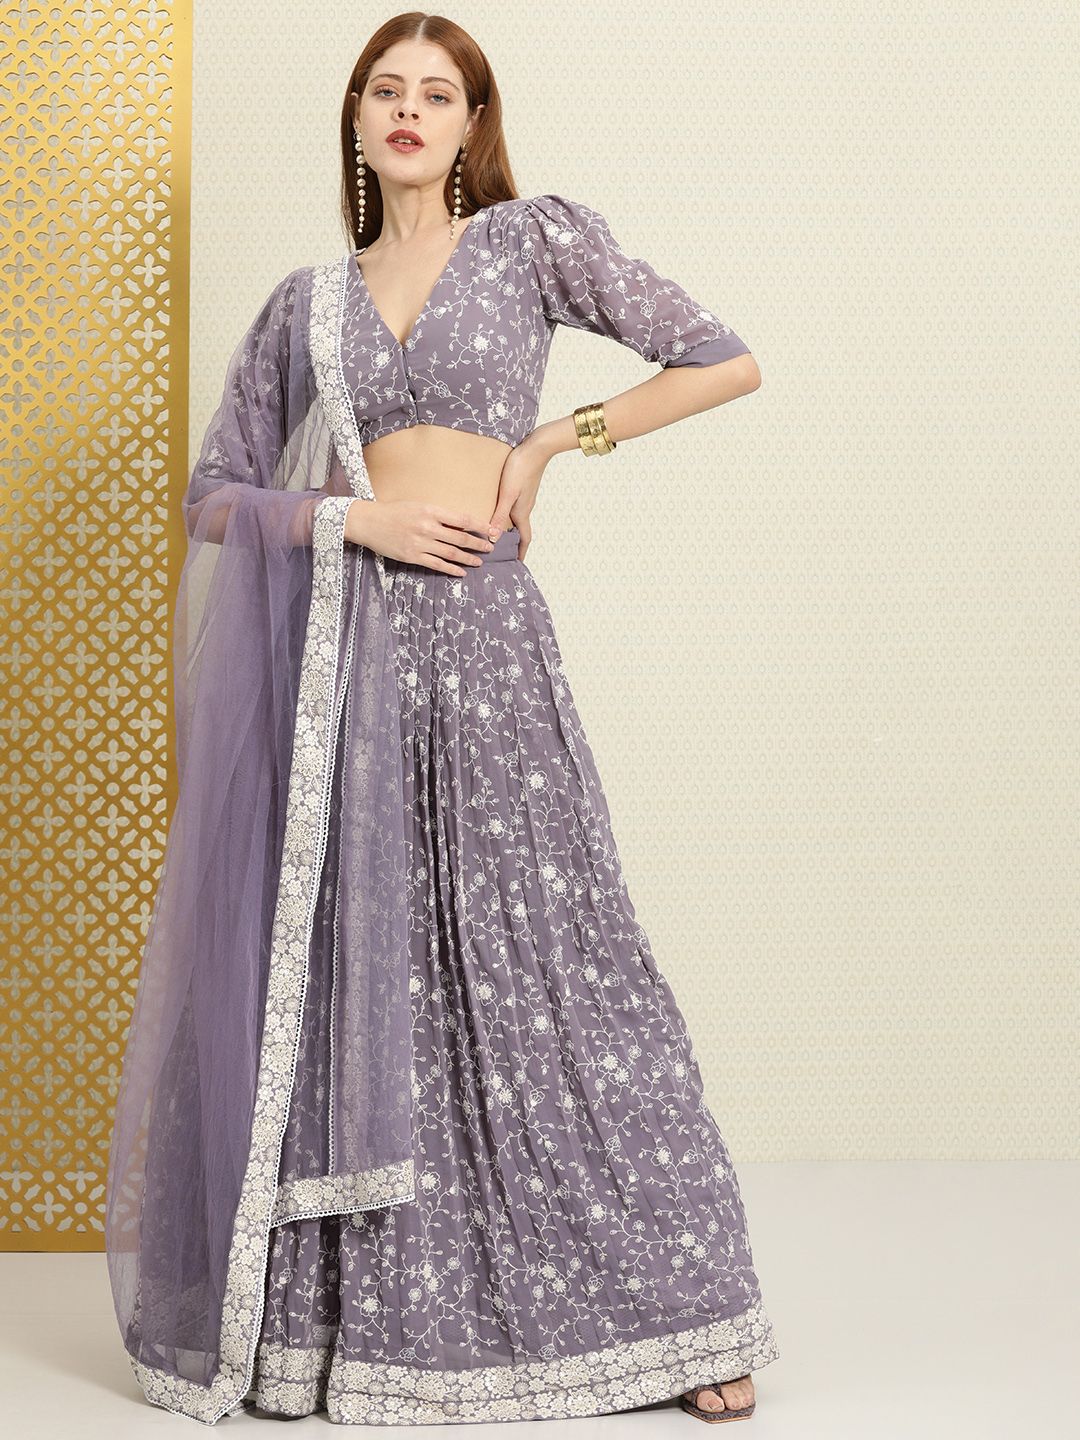 House of Pataudi Lavender Embroidered Thread Work Semi-Stitched Lehenga & Unstitched Blouse With Dupatta Price in India